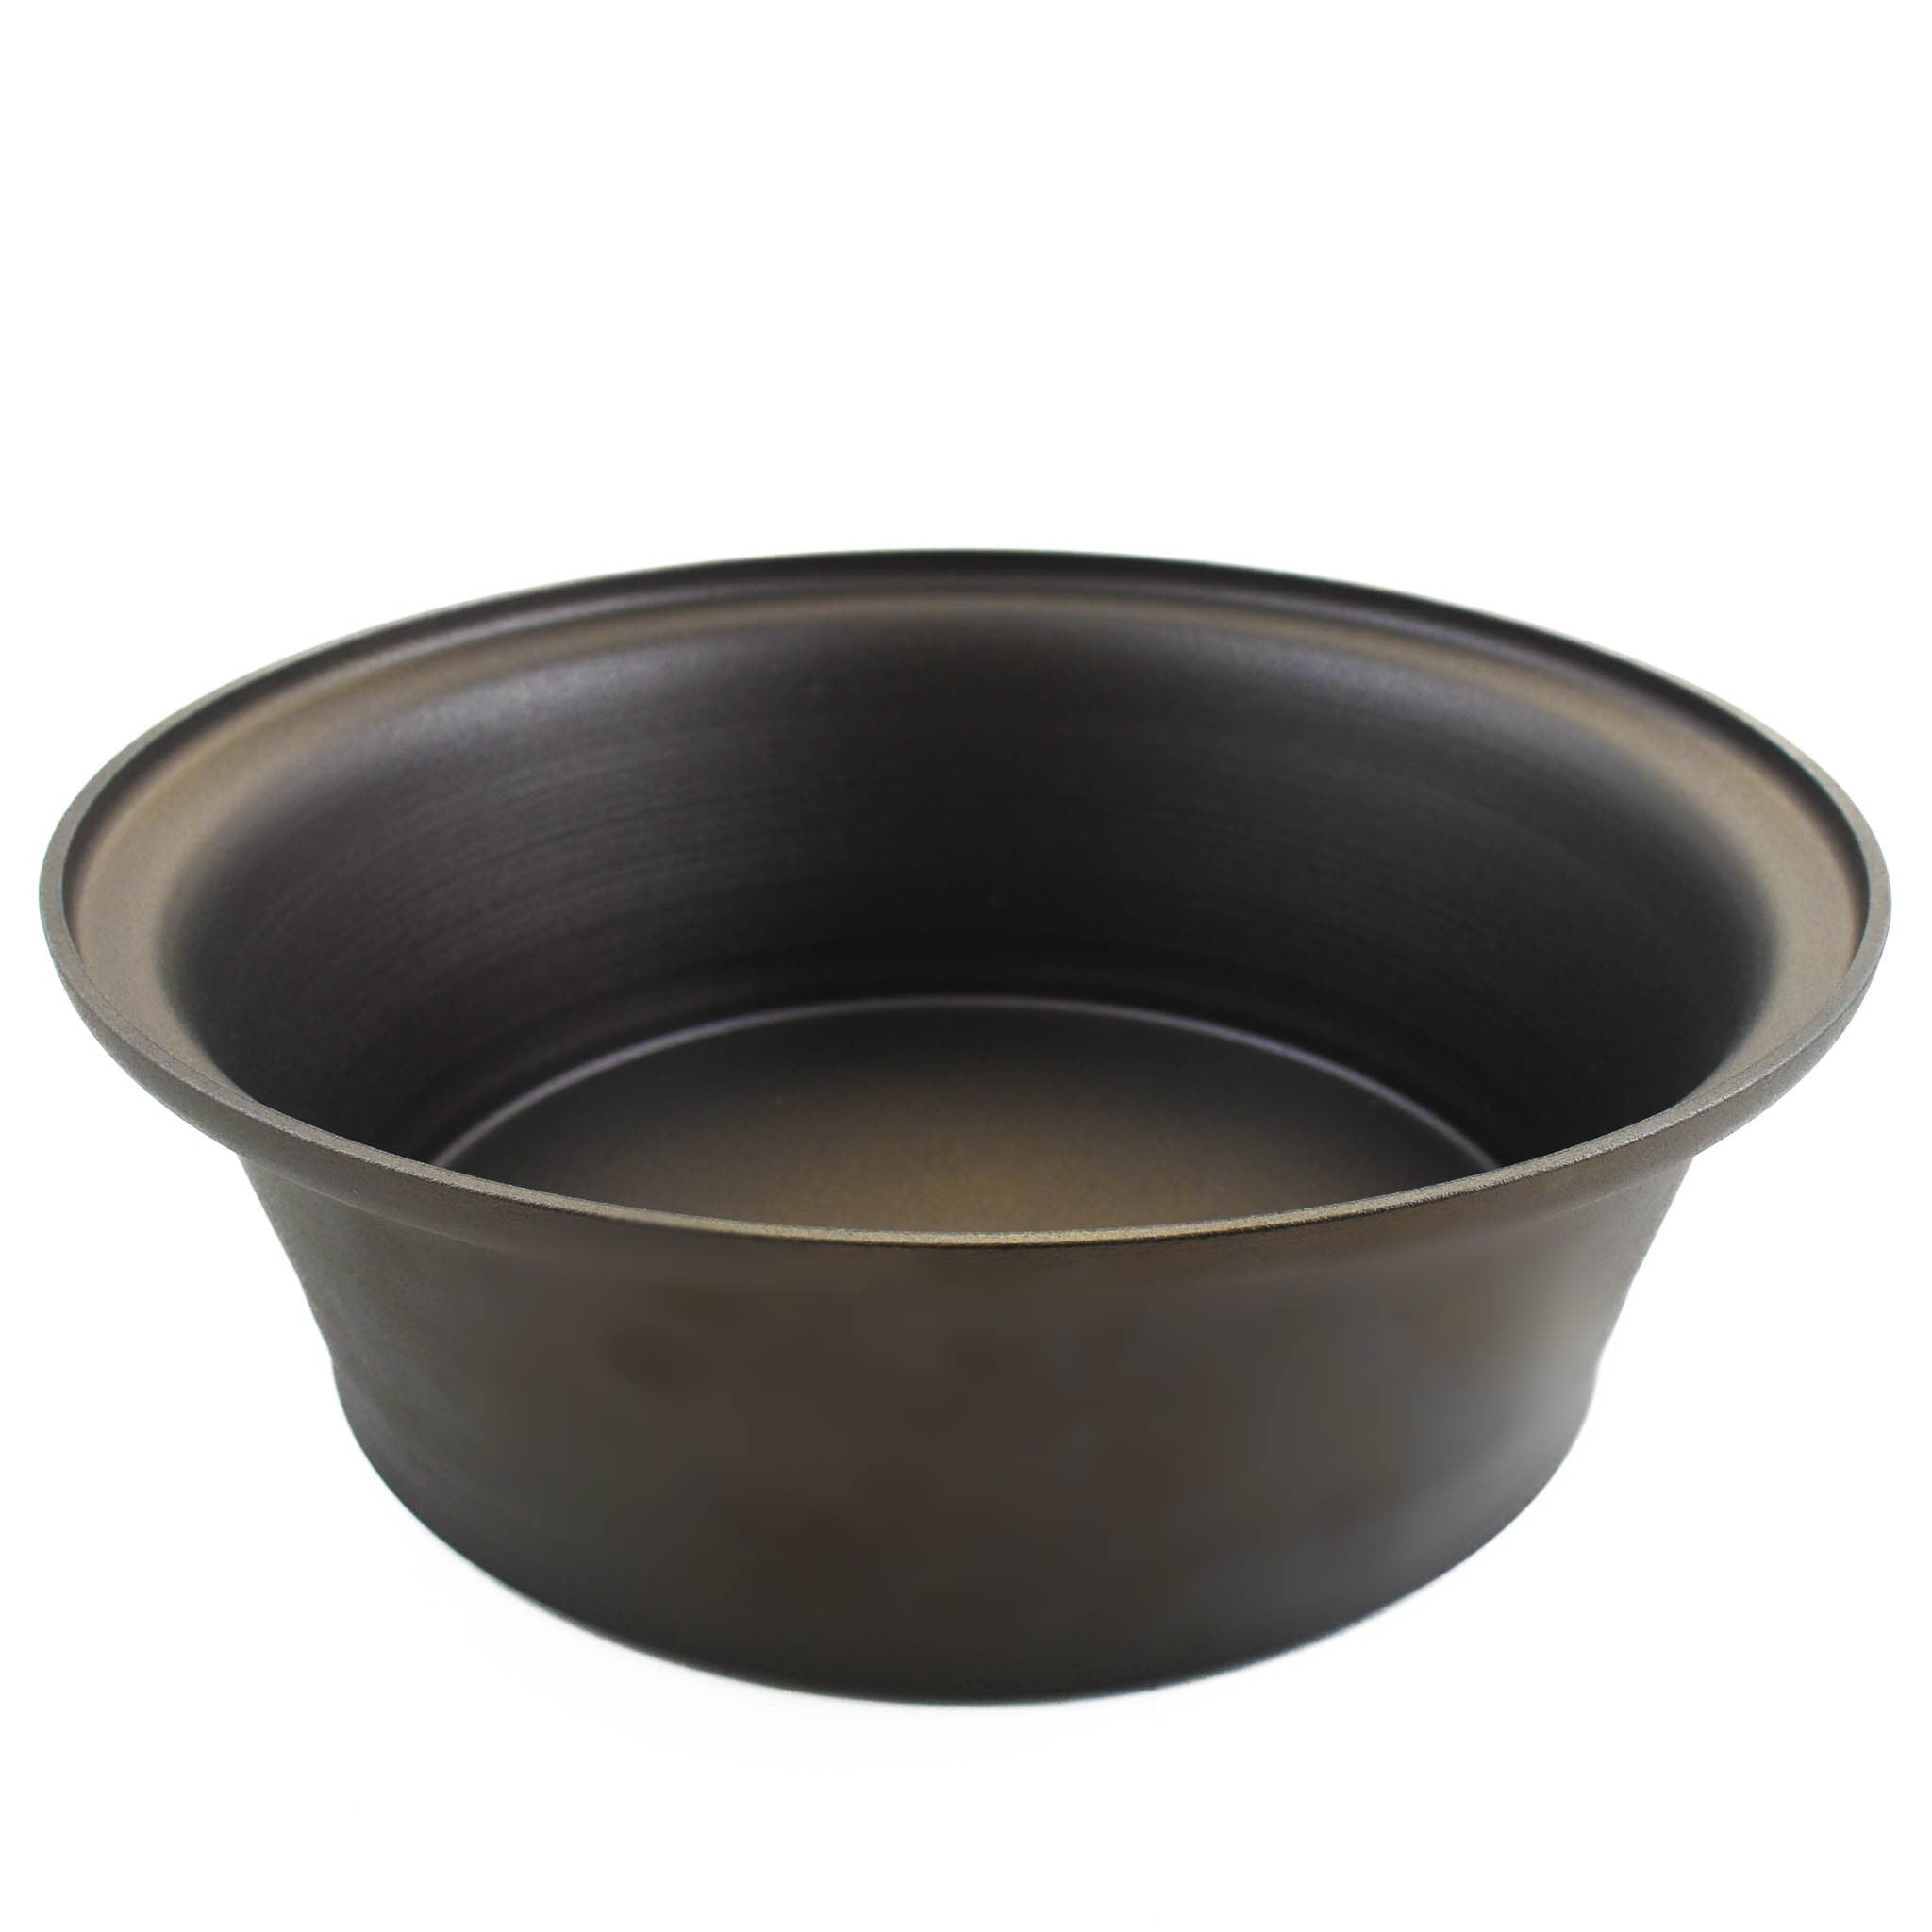 Netherton Foundry Copper Tagine with Spun Iron Base, 7 litre